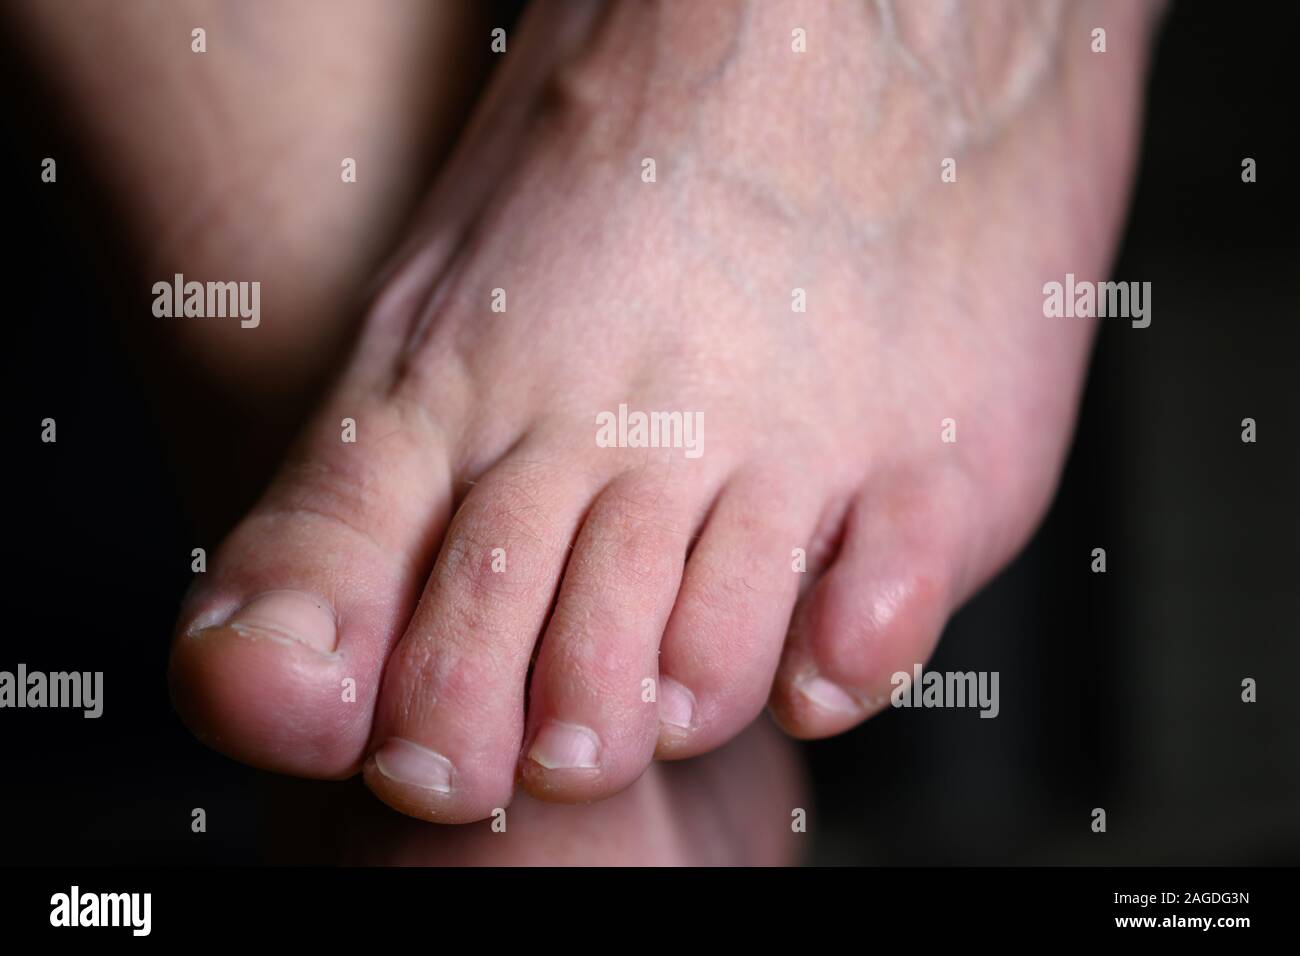 Close up of shamed woman hiding her altlete's foot fungus infection. Smelly weaty feet carrying an infectious disease Stock Photo